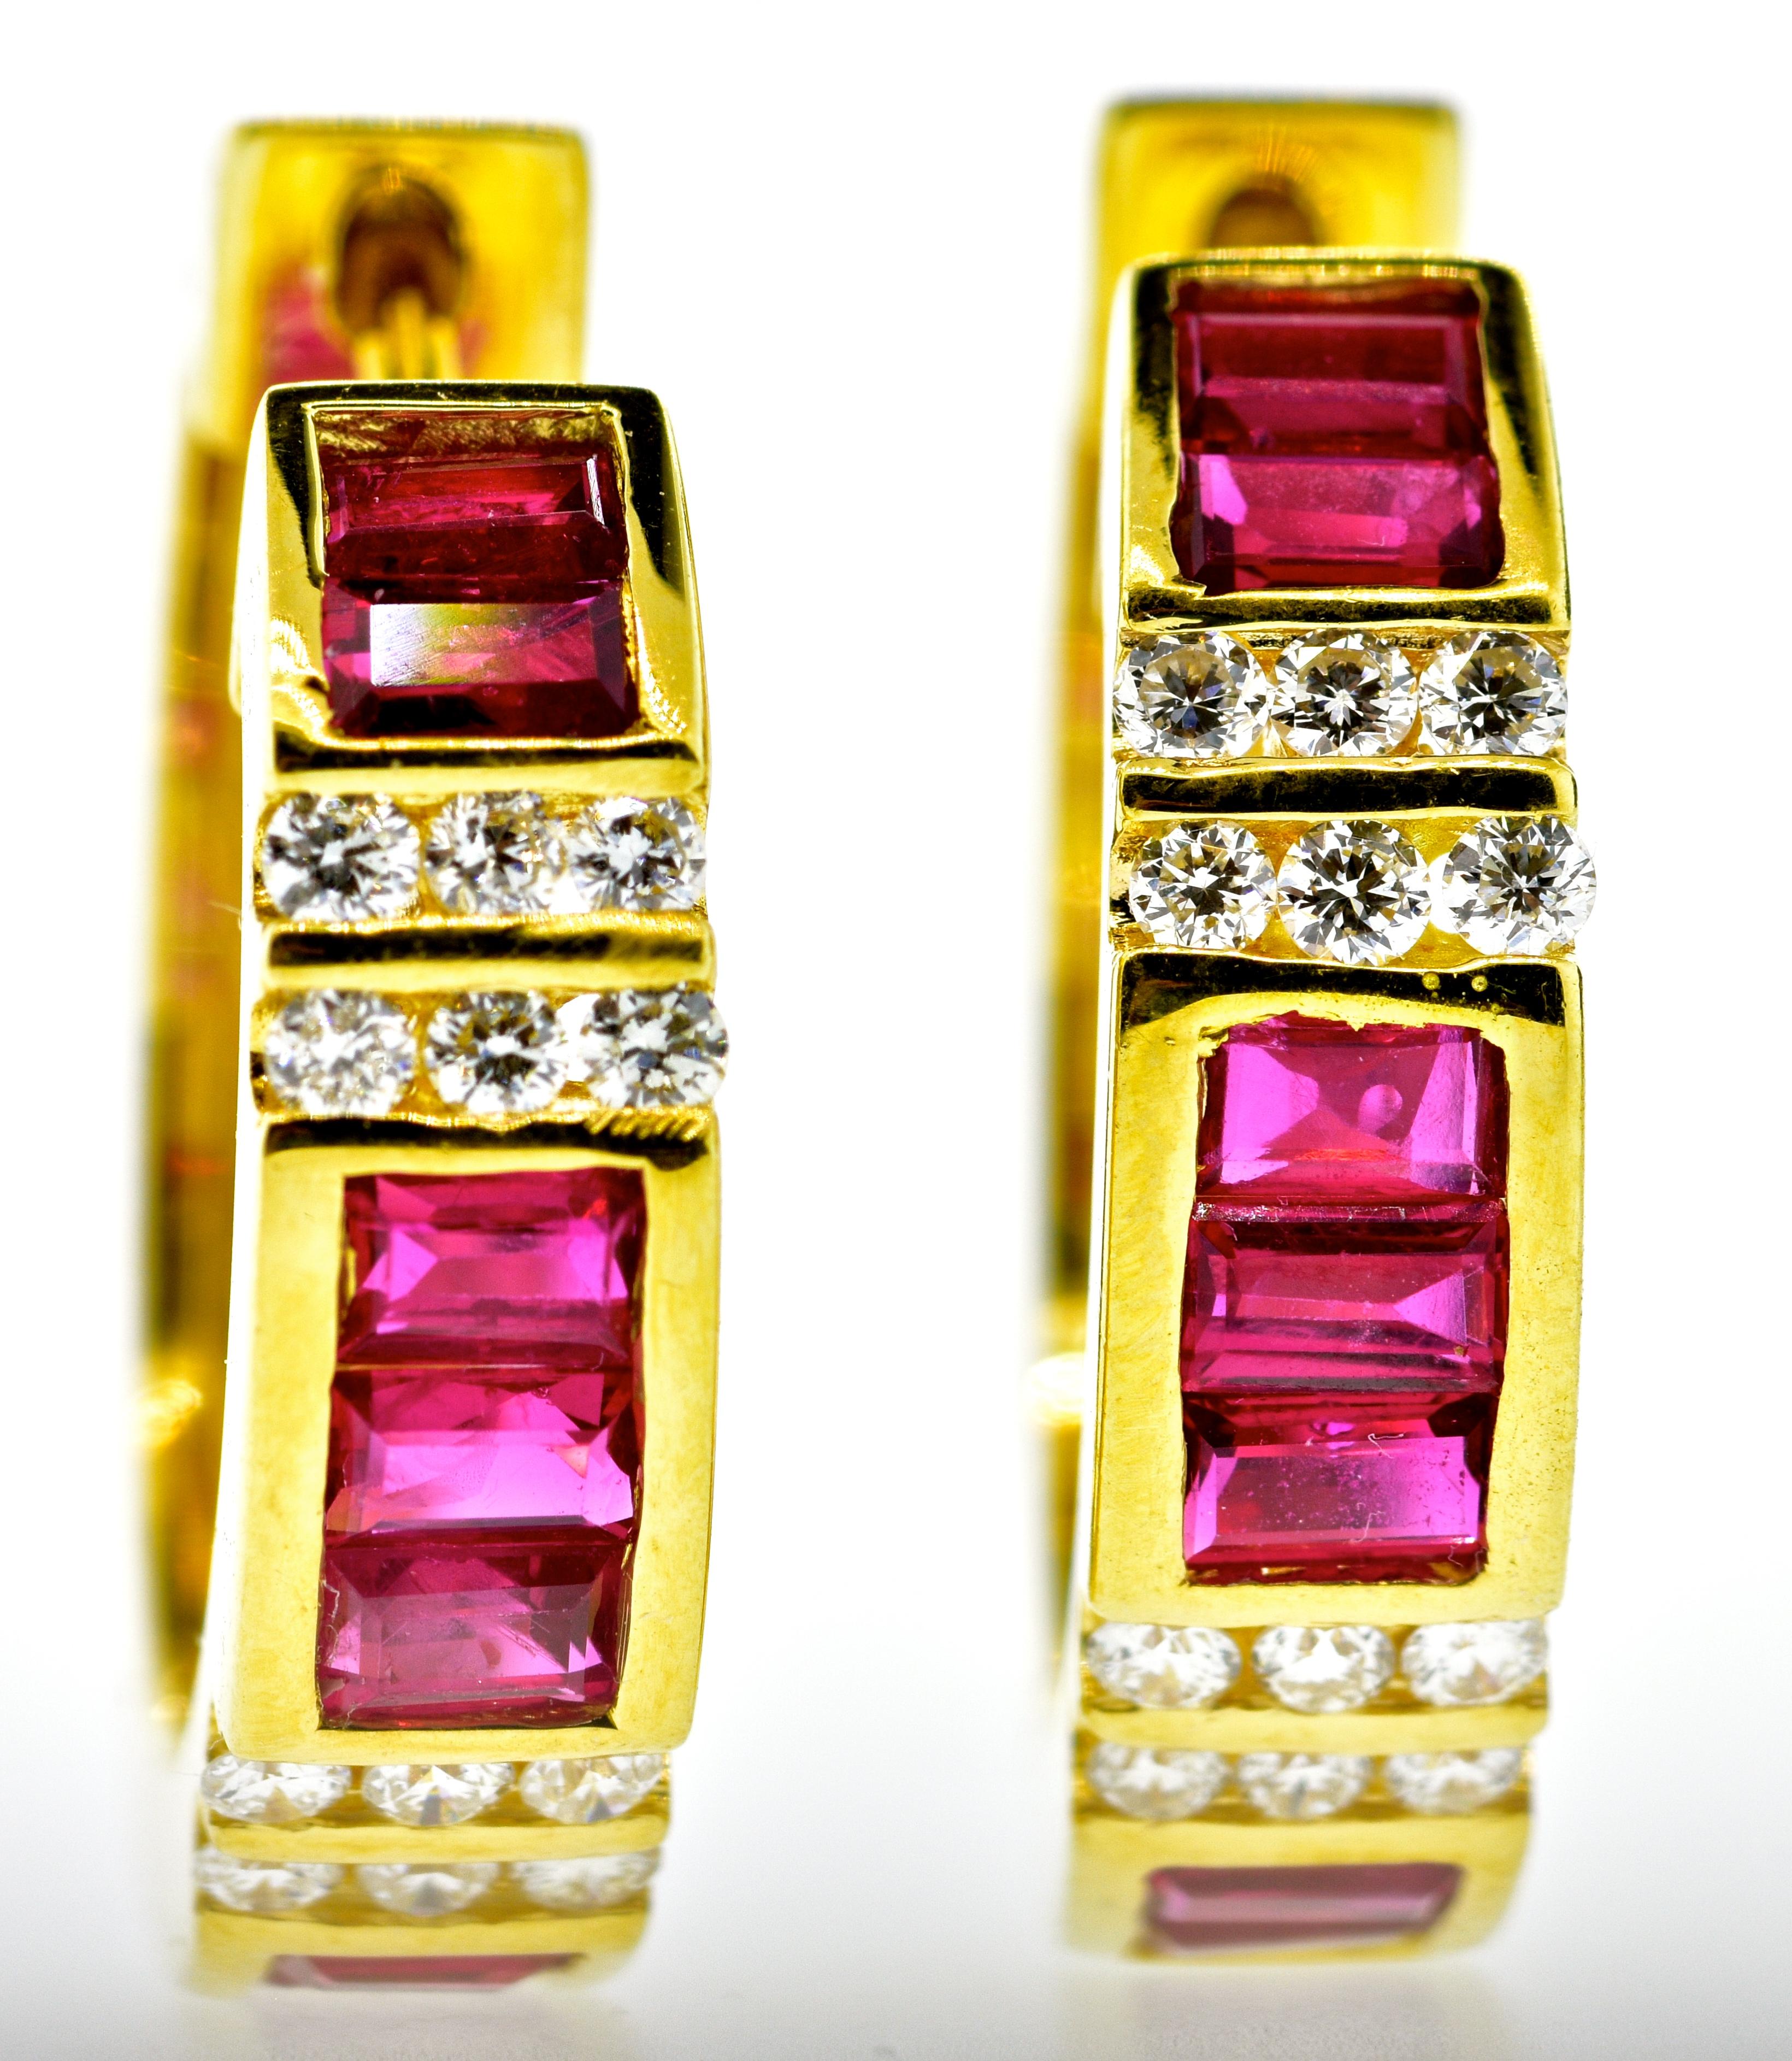 Diamond and Ruby earrings in 18K yellow gold.  There are 14 baguette cut natural bright red rubies weighing an estimated .70 cts.  Fine white brilliant cut diamonds, near colorless and very slightly included, VS1, are interspersed between the  rows